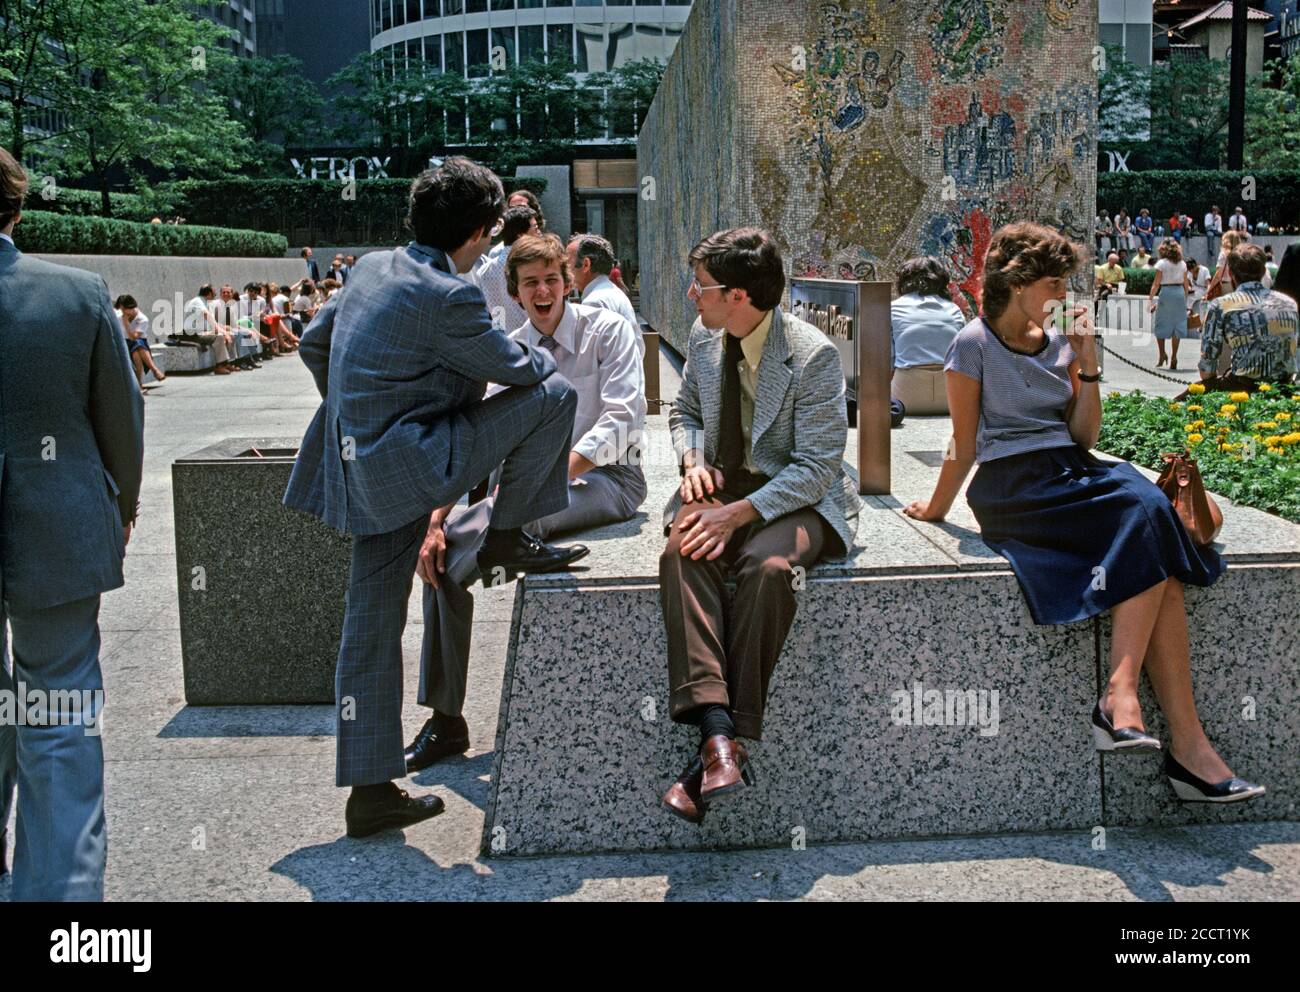 LUNCH TIME CROWD IN CHASE TOWER PLAZA WITH MARC CHAGALL'S MOSAIC 'FOUR SEASONS IN BACKGROUND, CHICAGO, USA 1970s Stock Photo